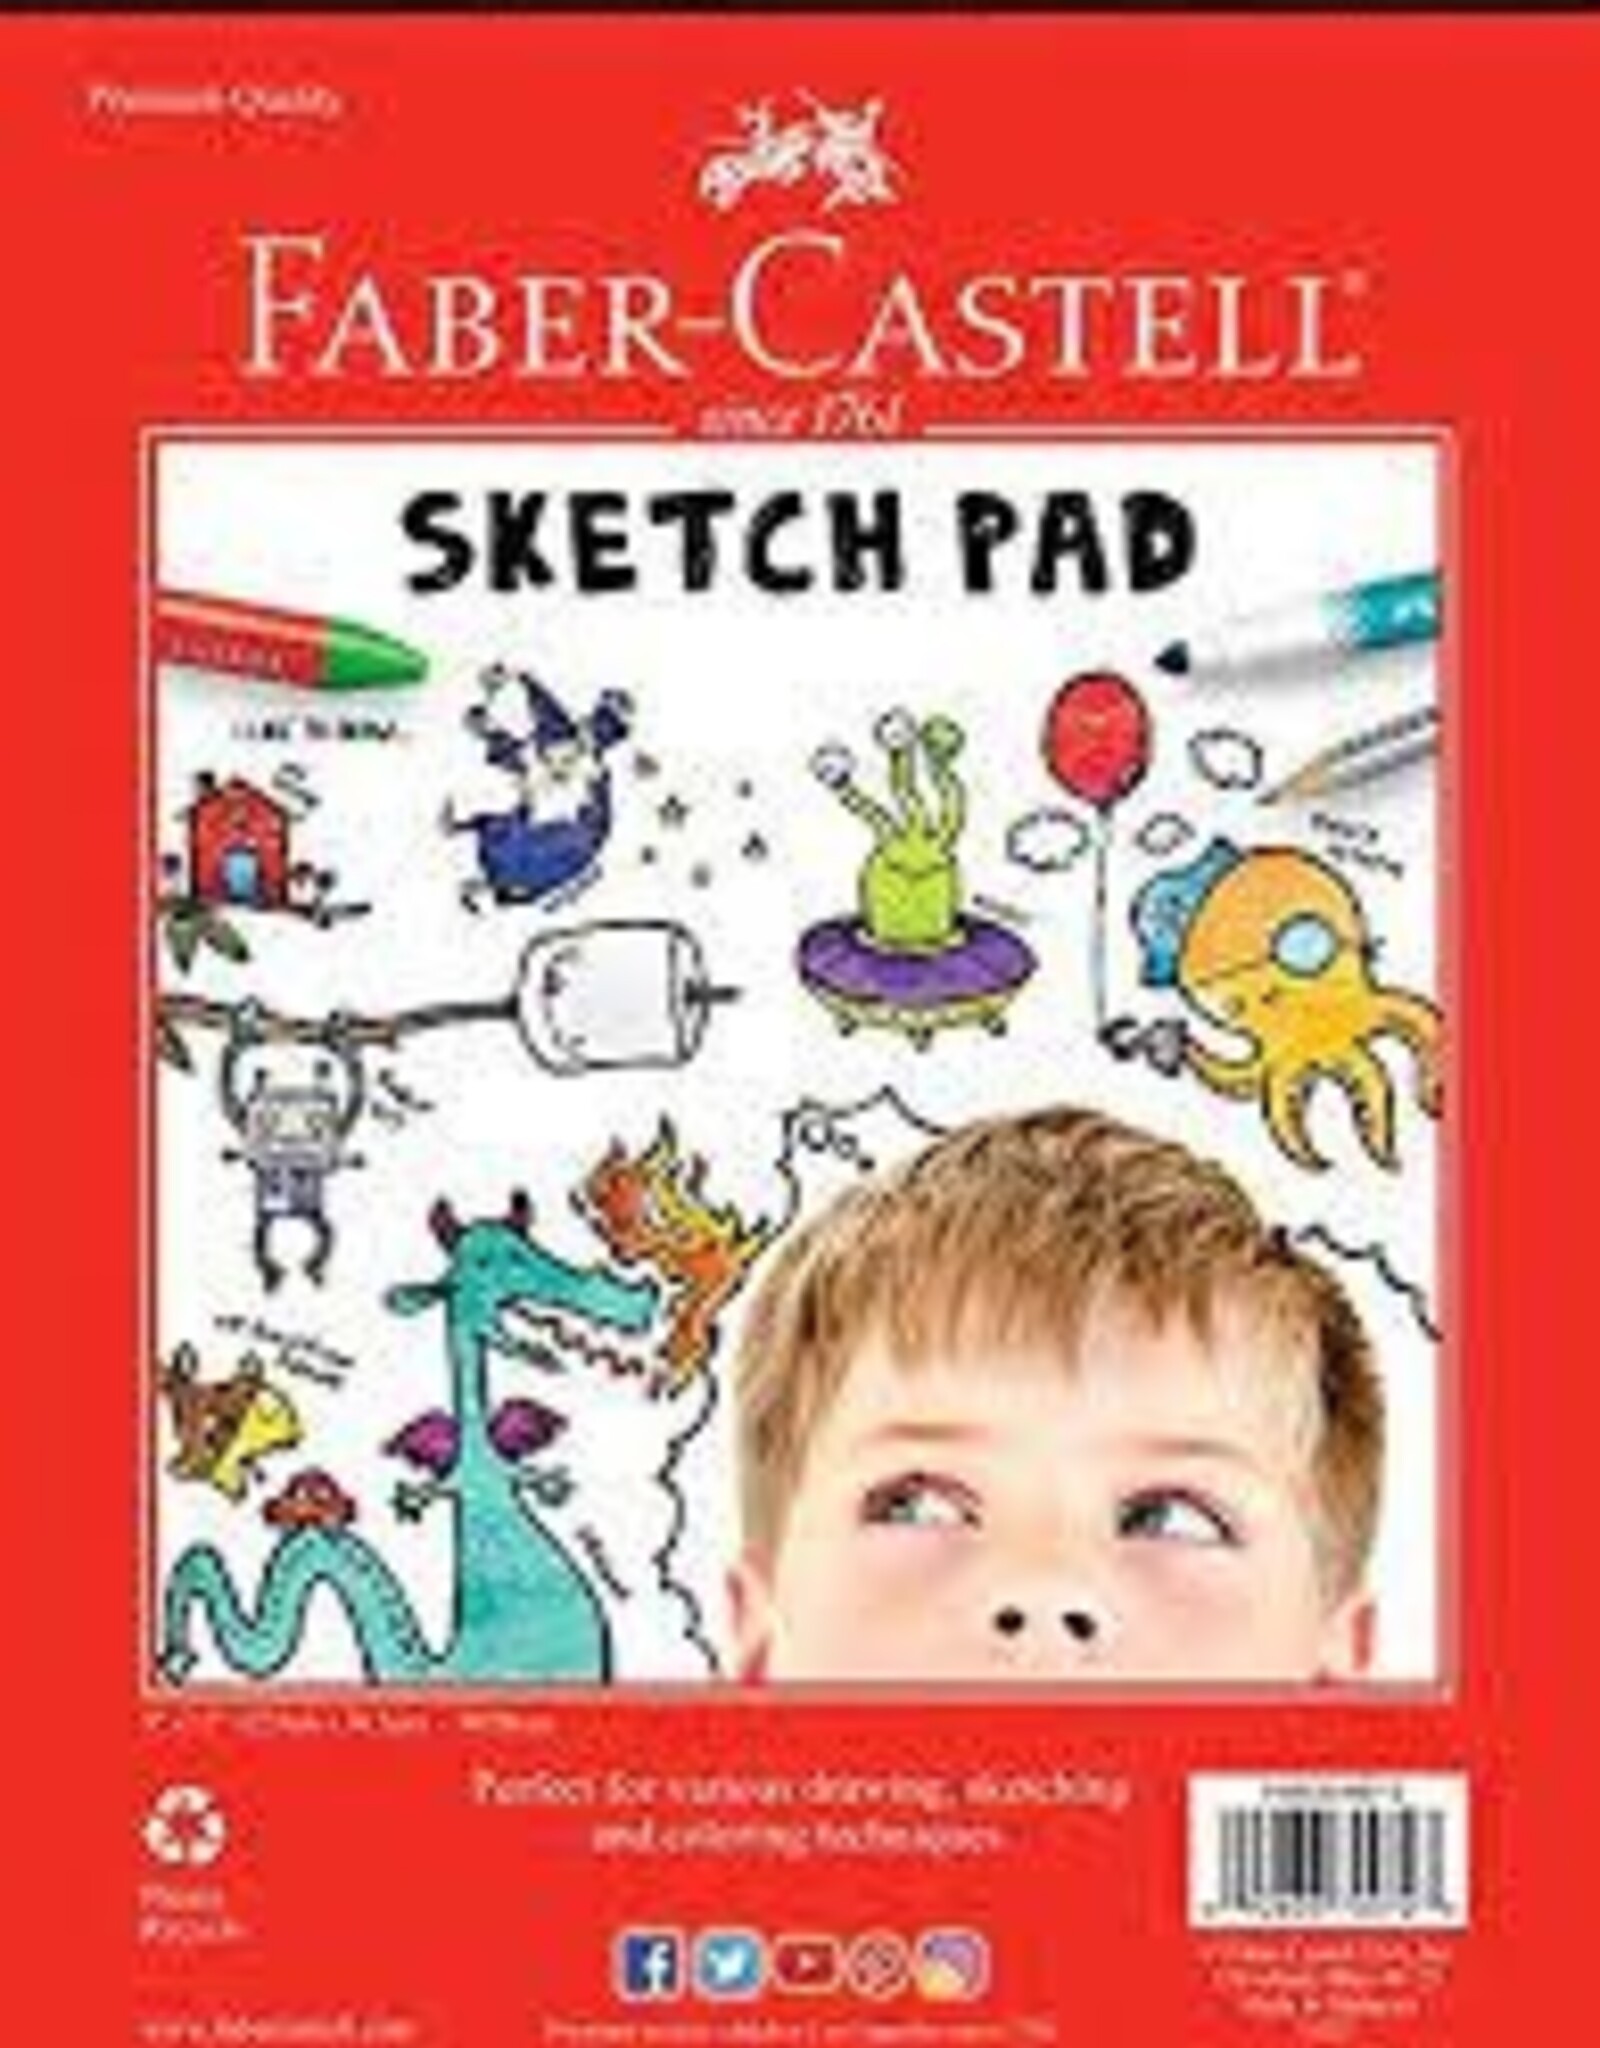 Faber Castell Sketch Pad 9" x 12